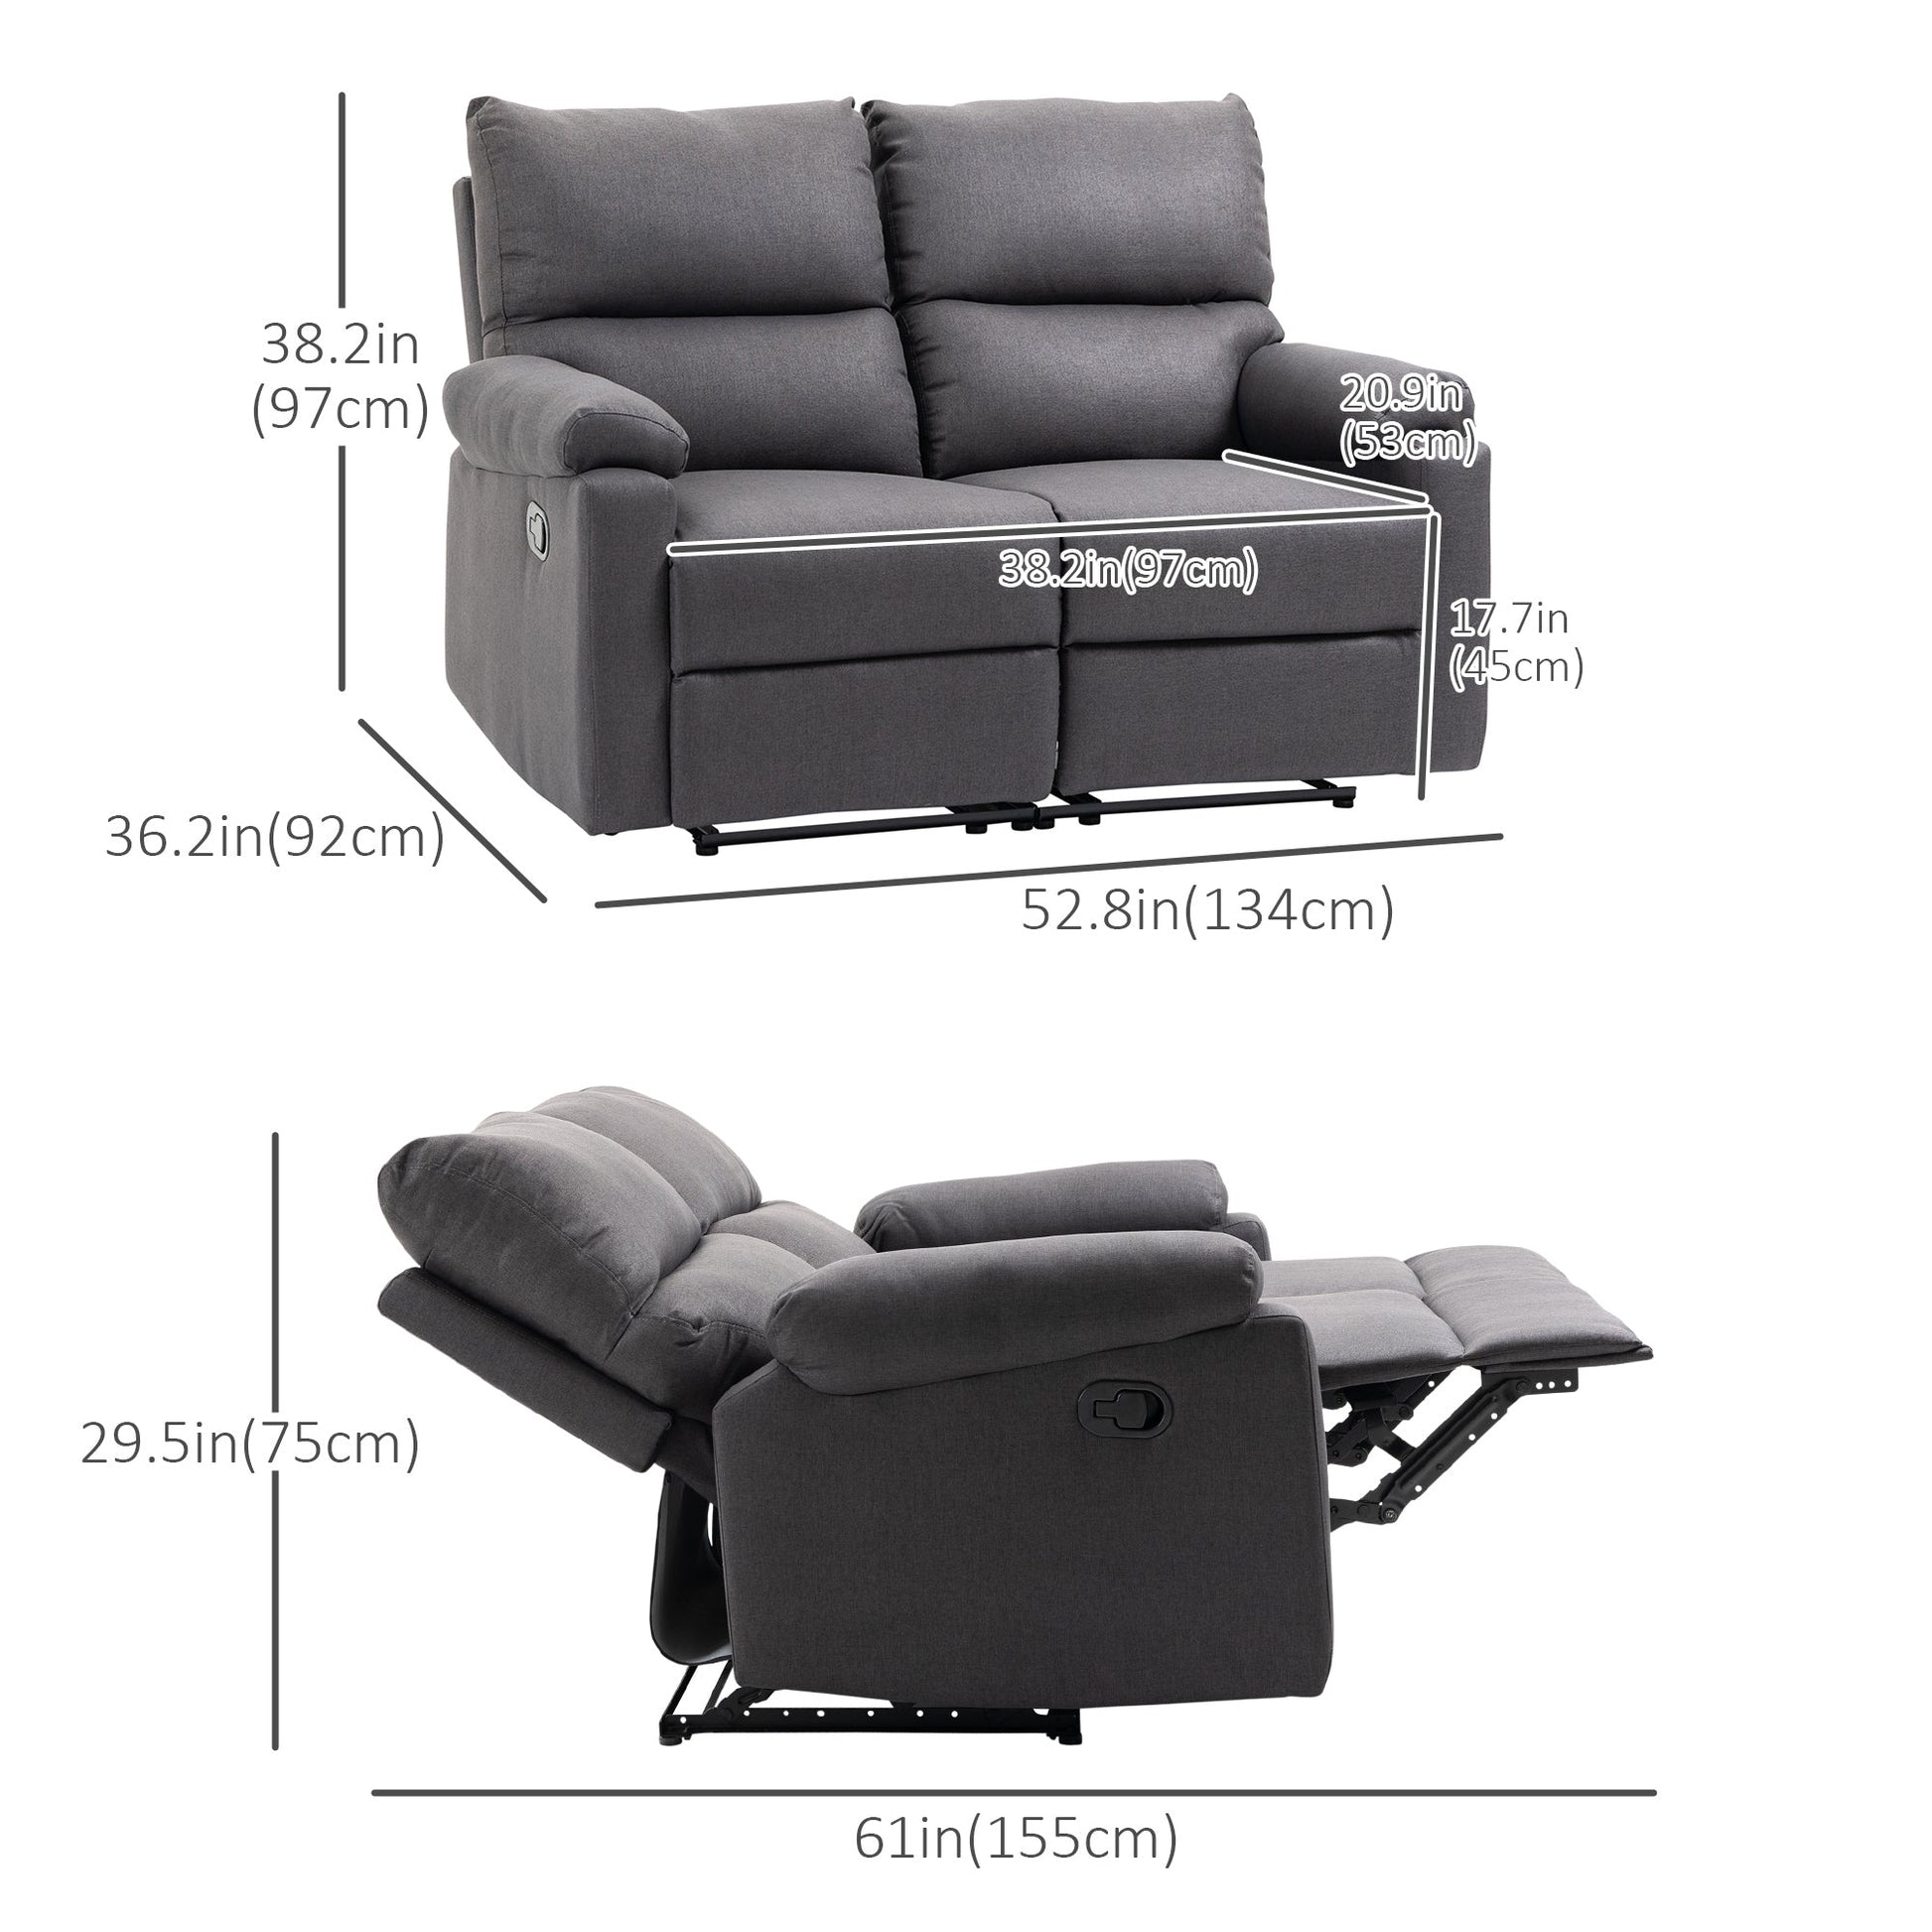 Loveseat Recliner Sofa, 2 Seater Reclining Chair with Footrest and Split Backrest, Dark Grey - Gallery Canada